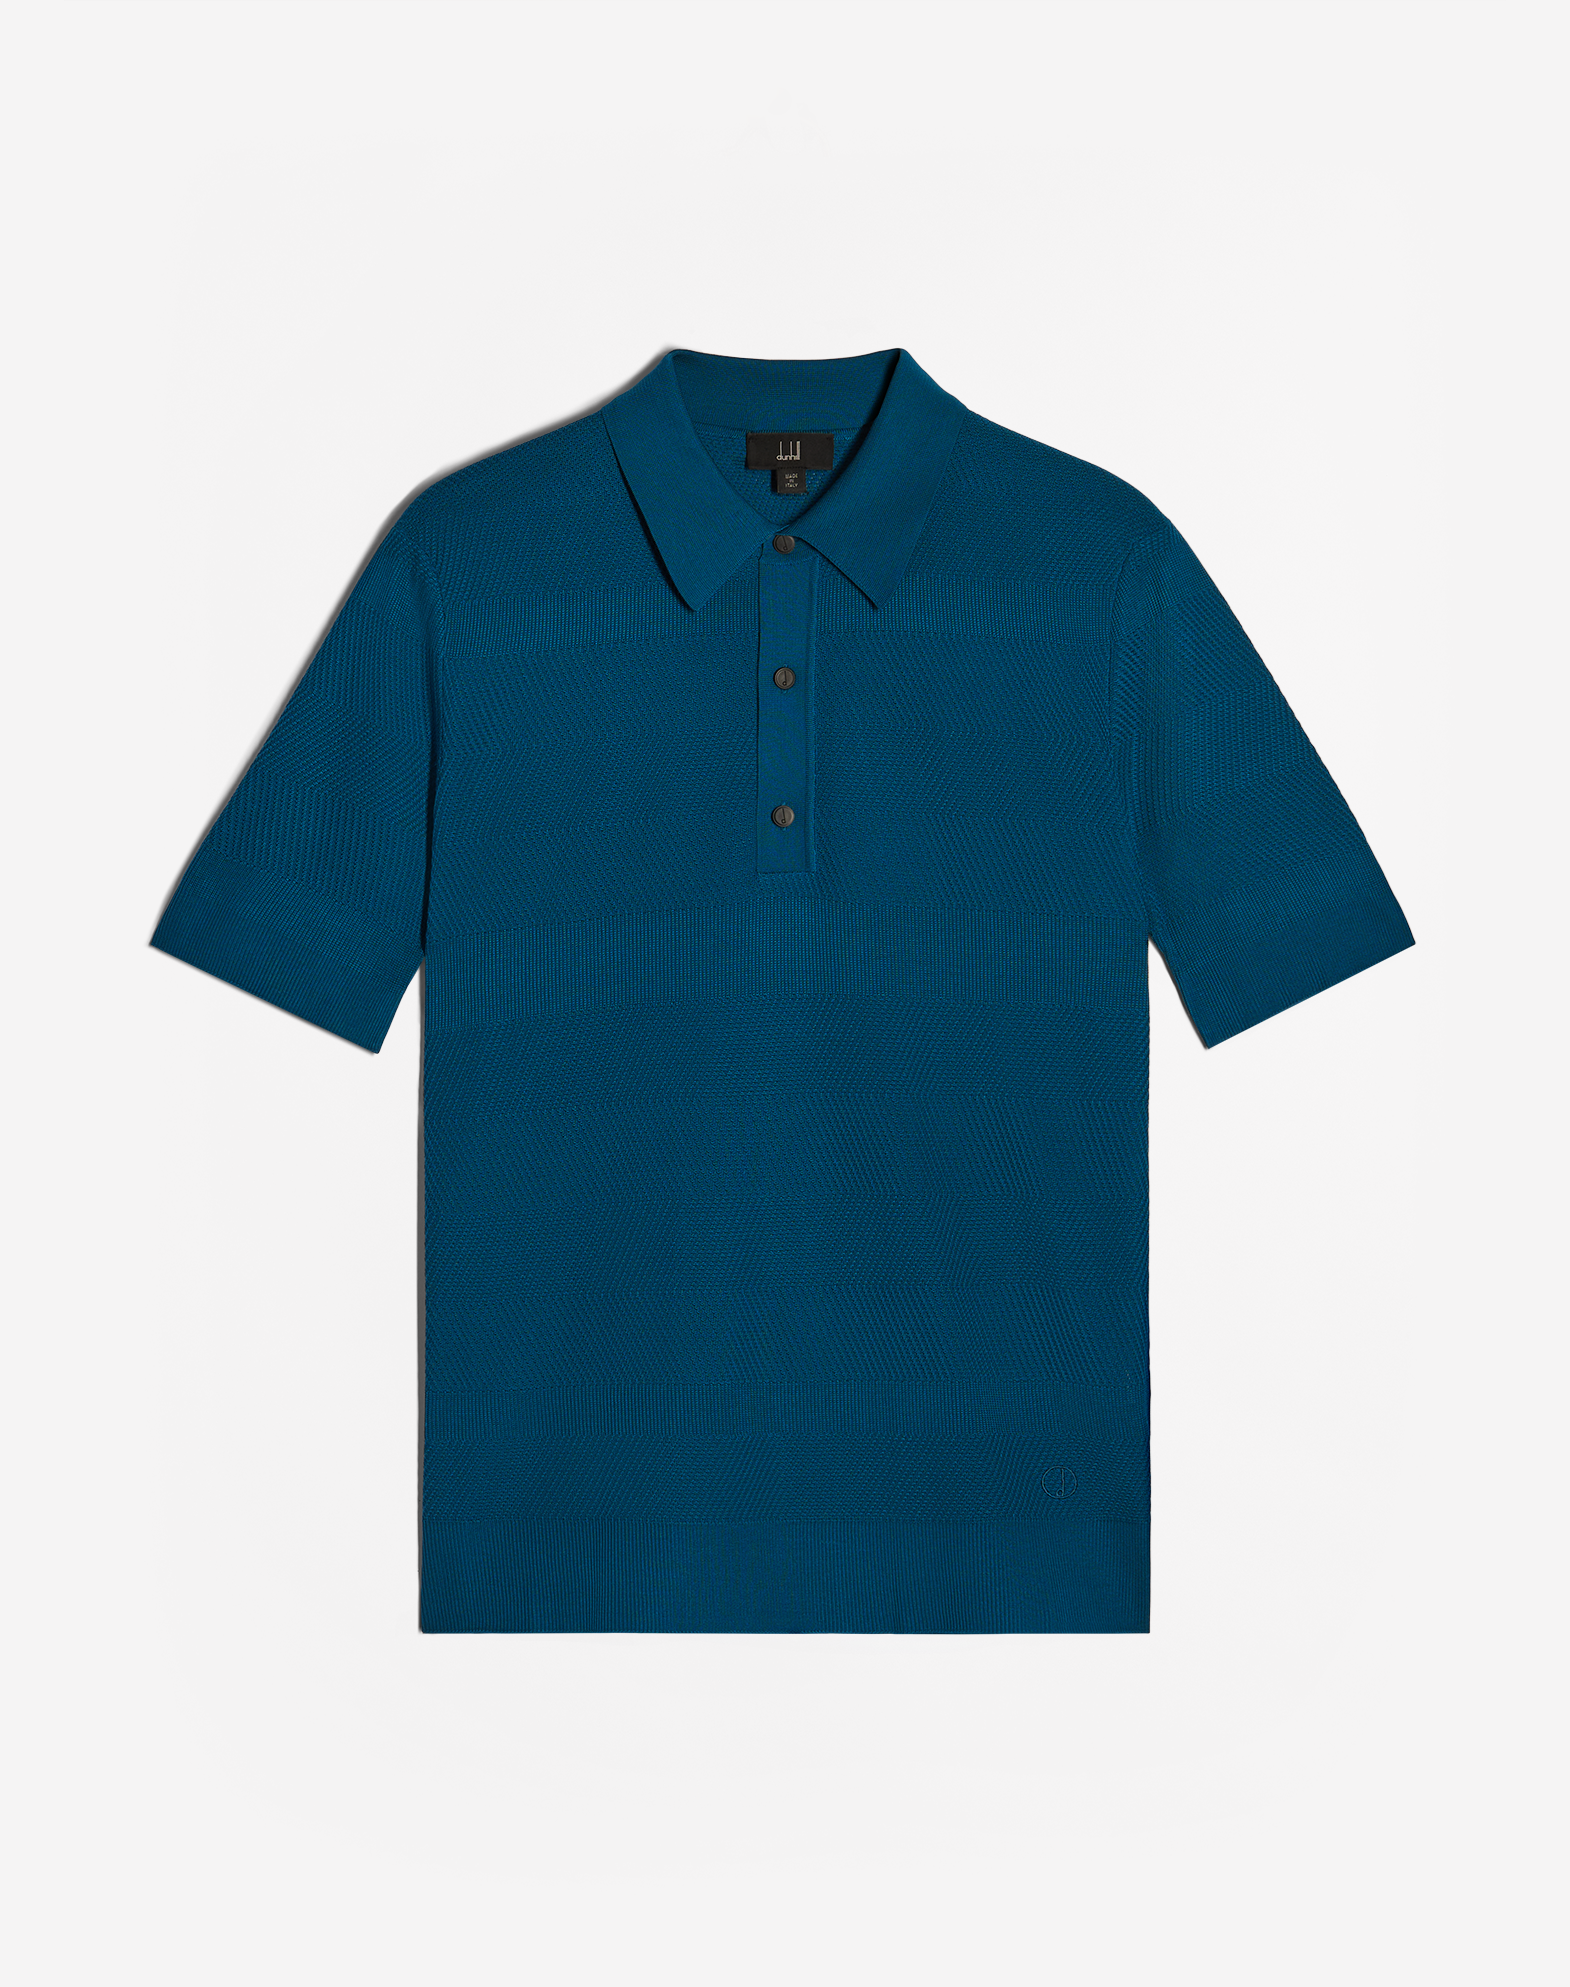 Dunhill Teal Gears Textured Short Sleeve Polo In Blue